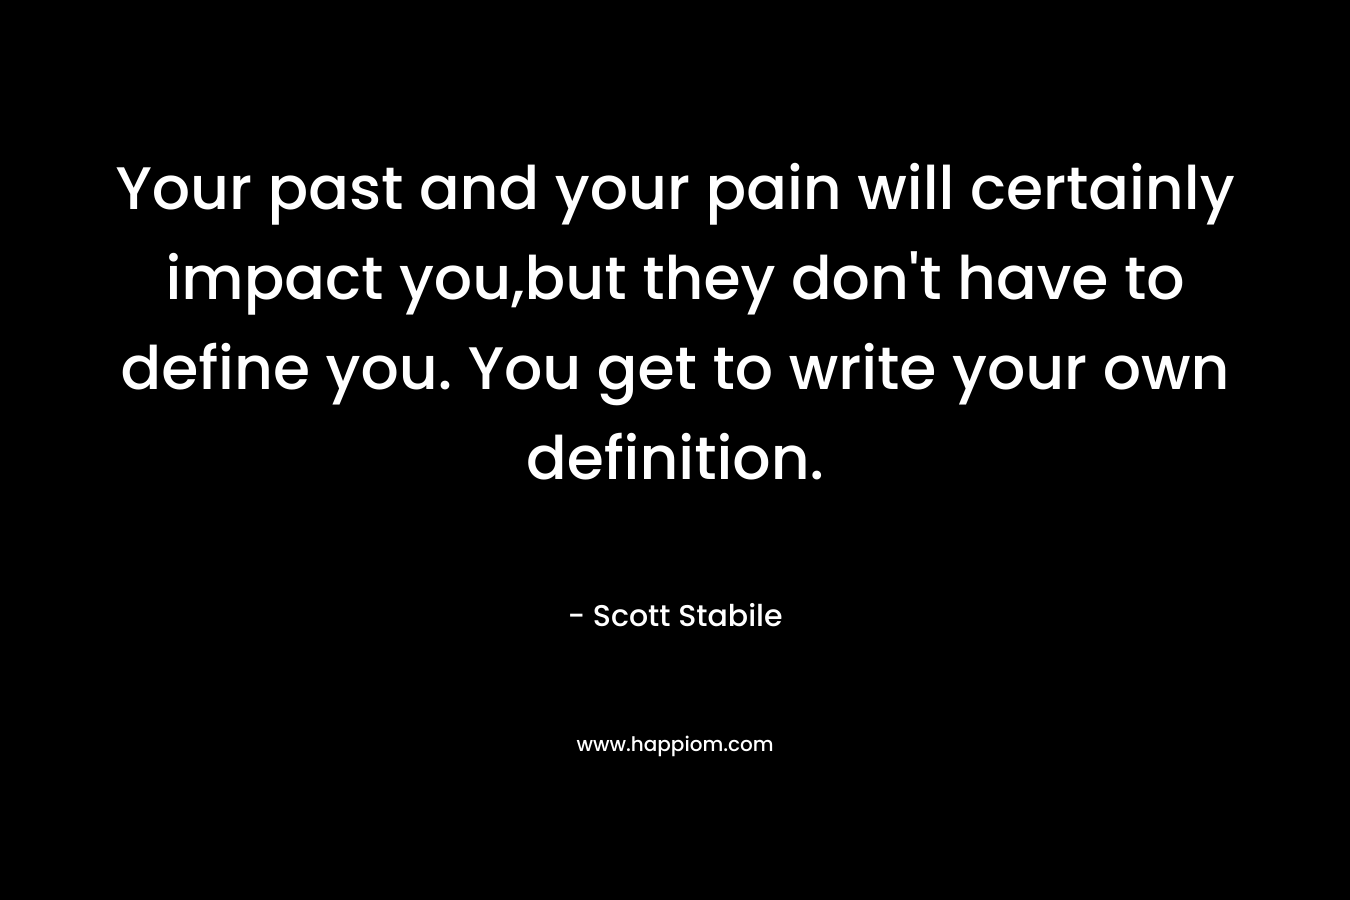 Your past and your pain will certainly impact you,but they don’t have to define you. You get to write your own definition. – Scott Stabile